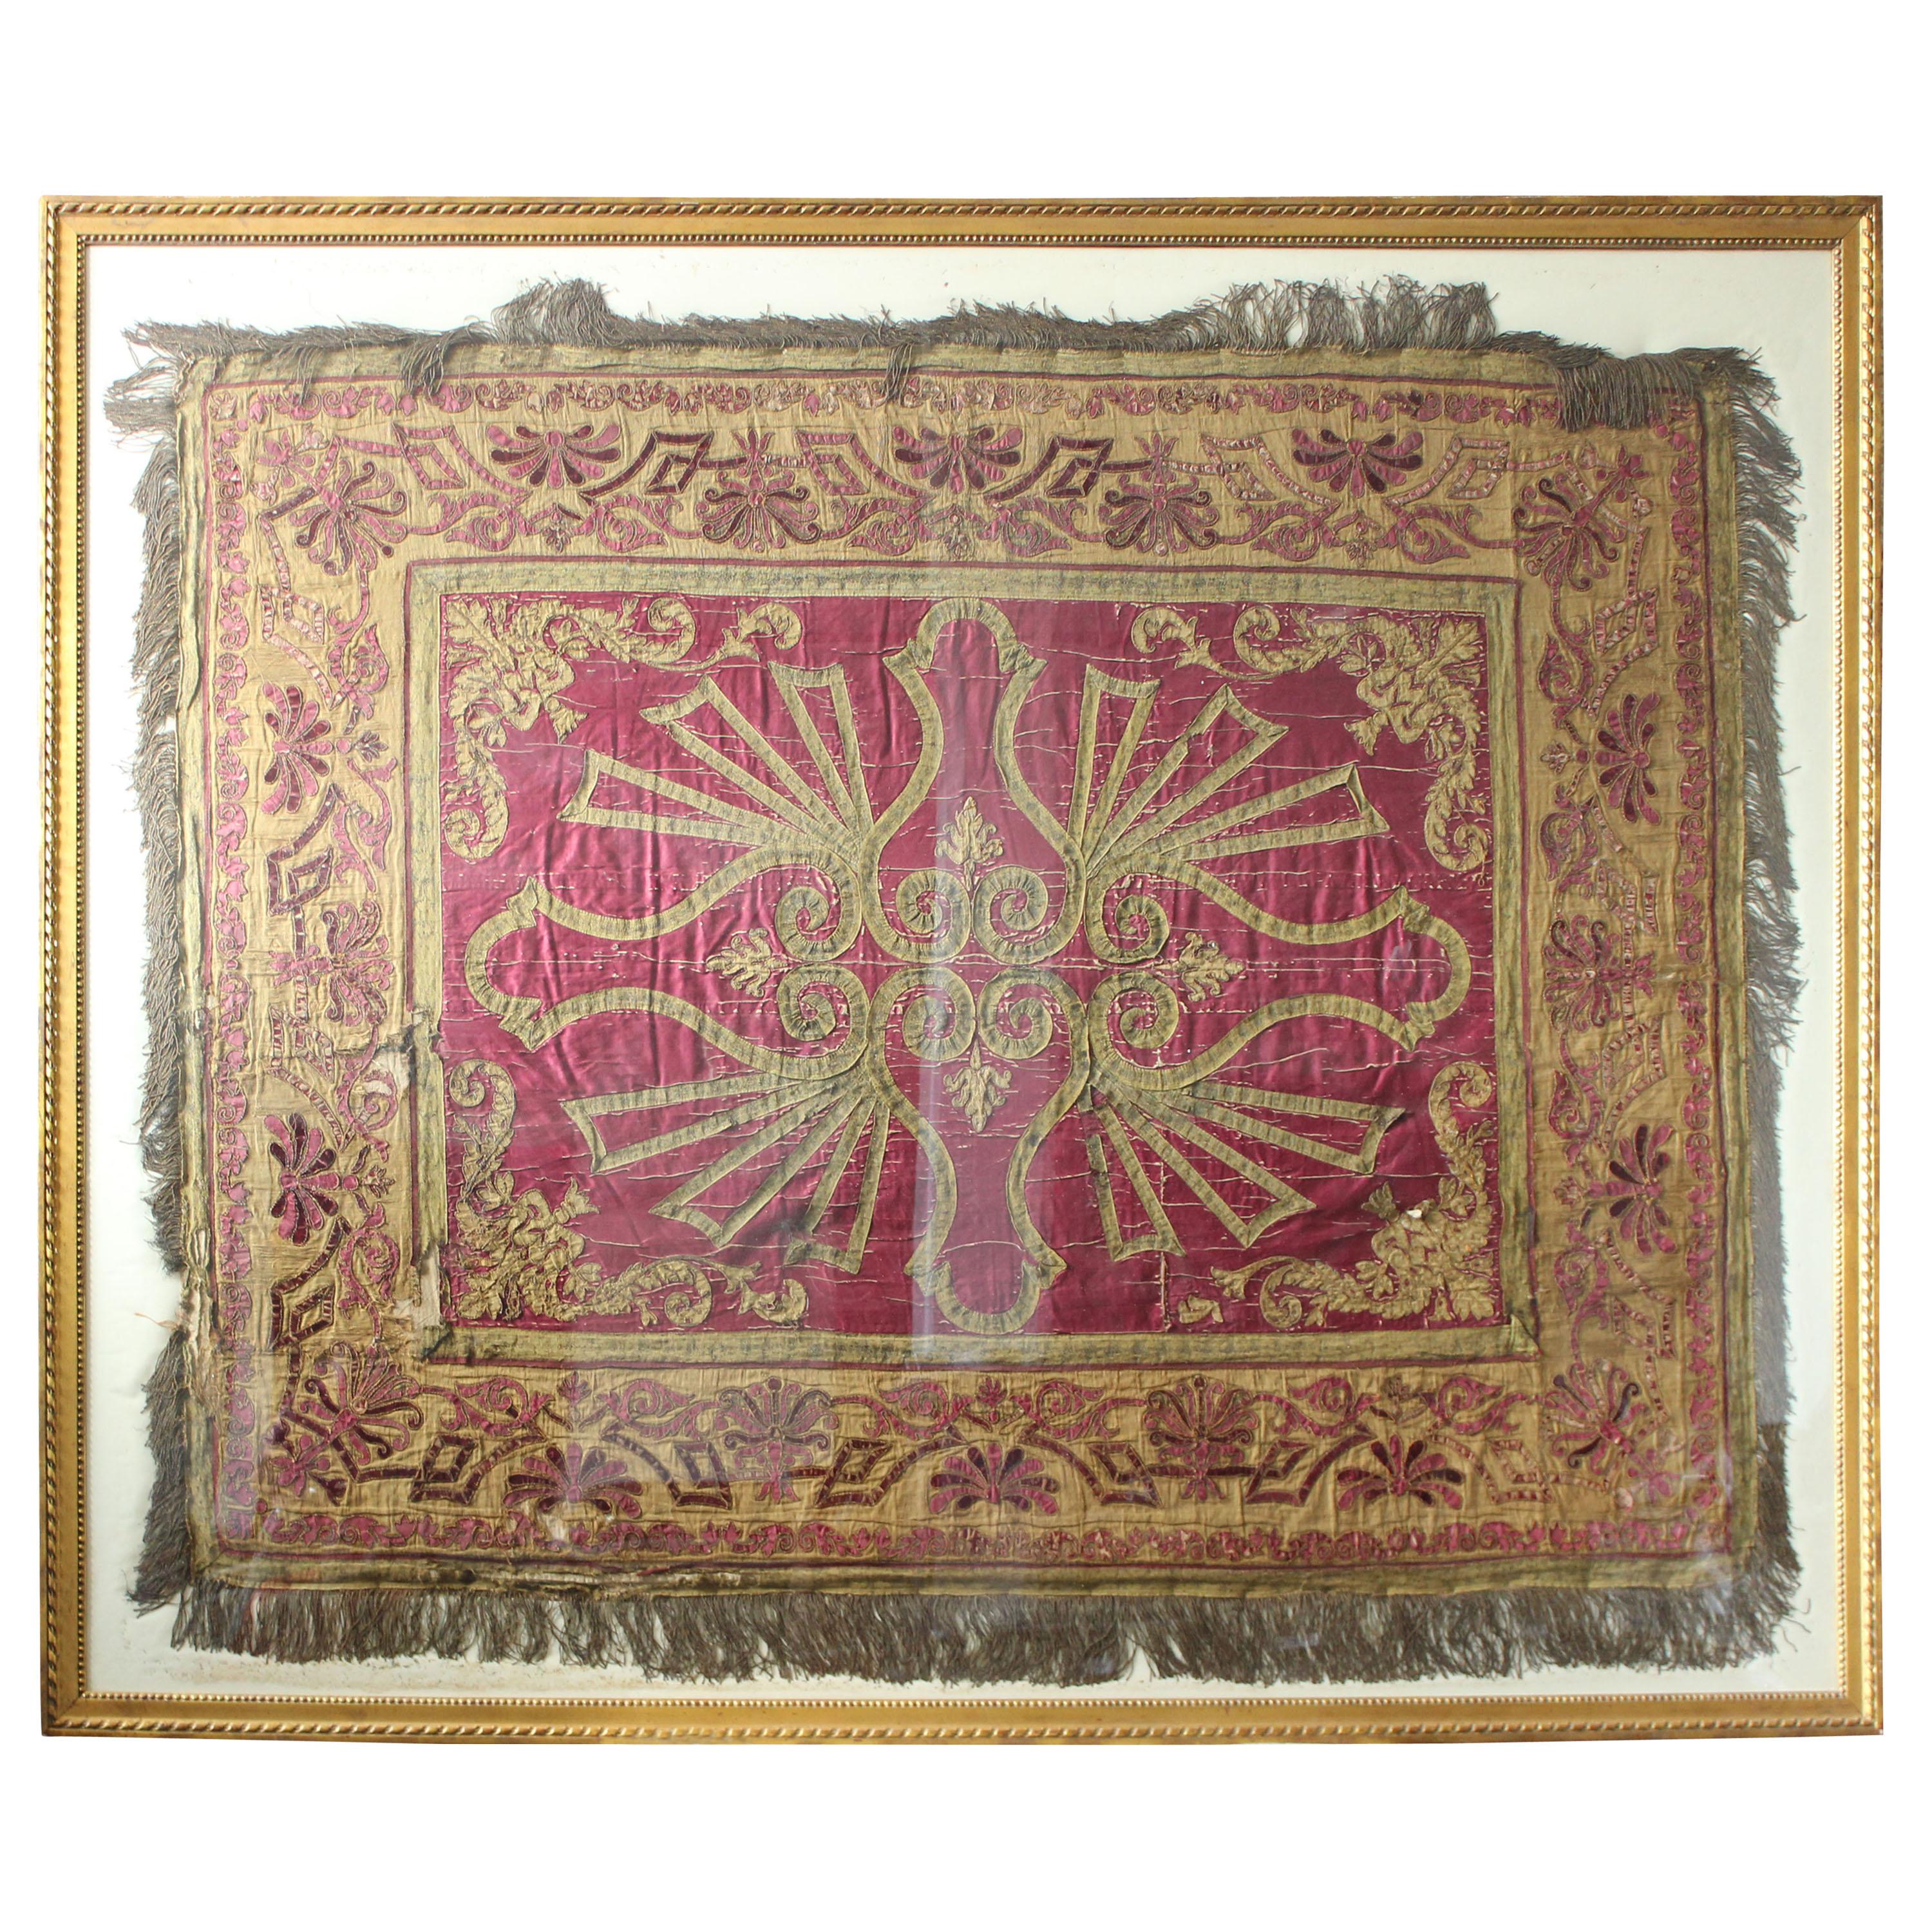 Framed Antique circa 1550 European Silk Tapestry/Bed Spread with Ornate Design 